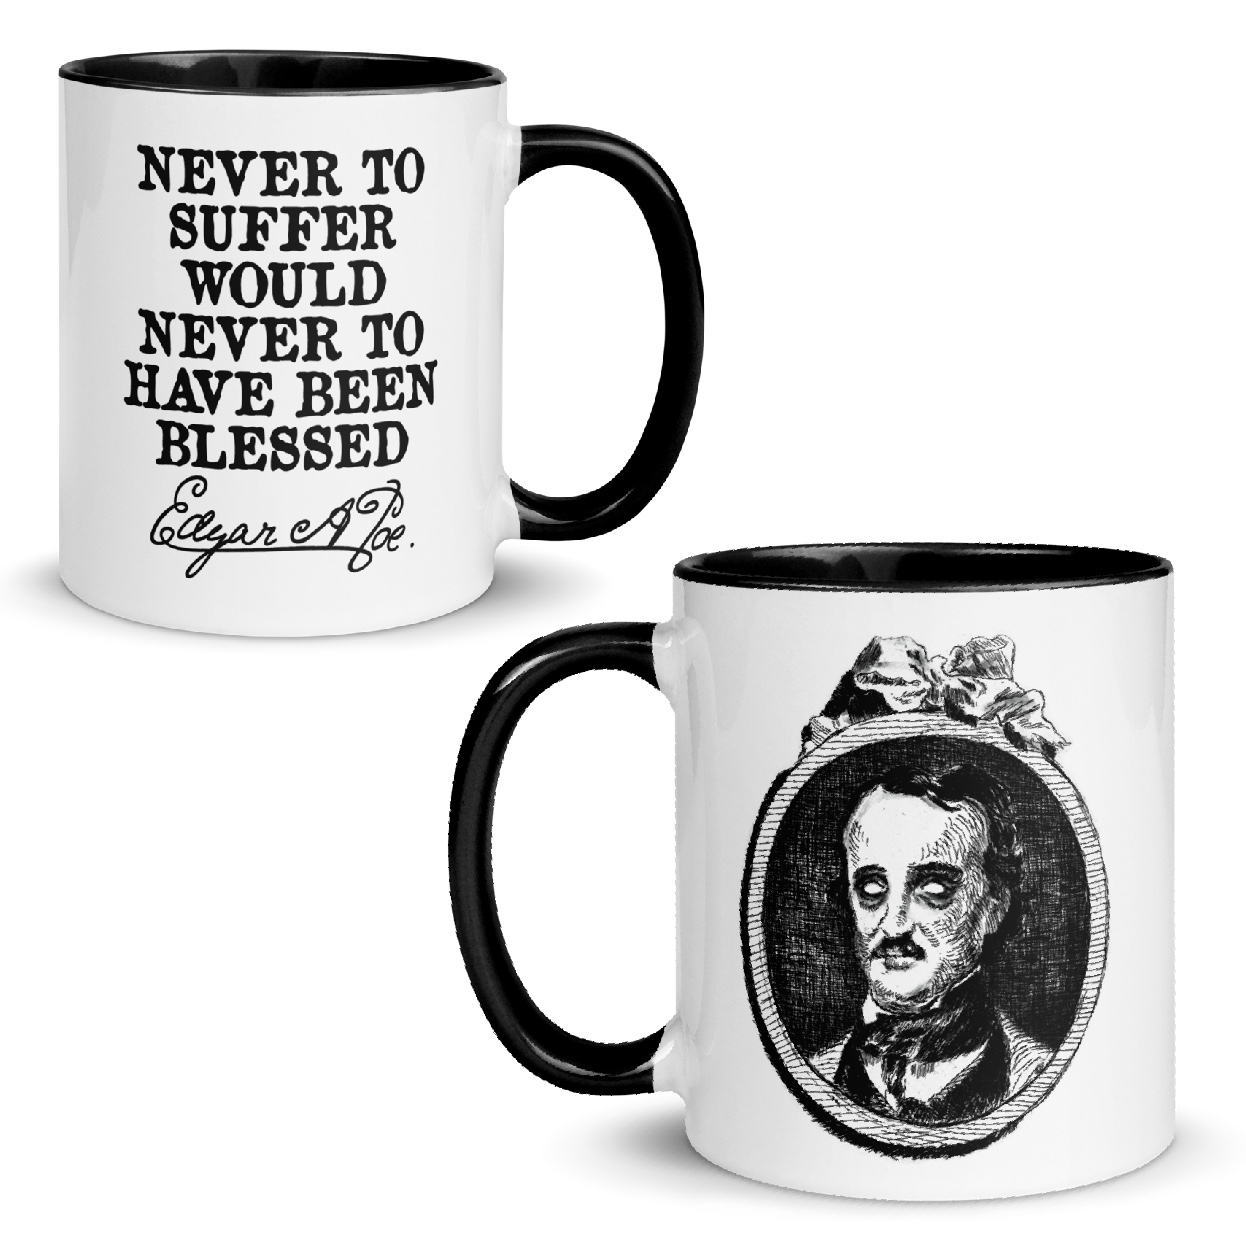 Featured image for “Never to suffer, E.A.Poe - Mug”